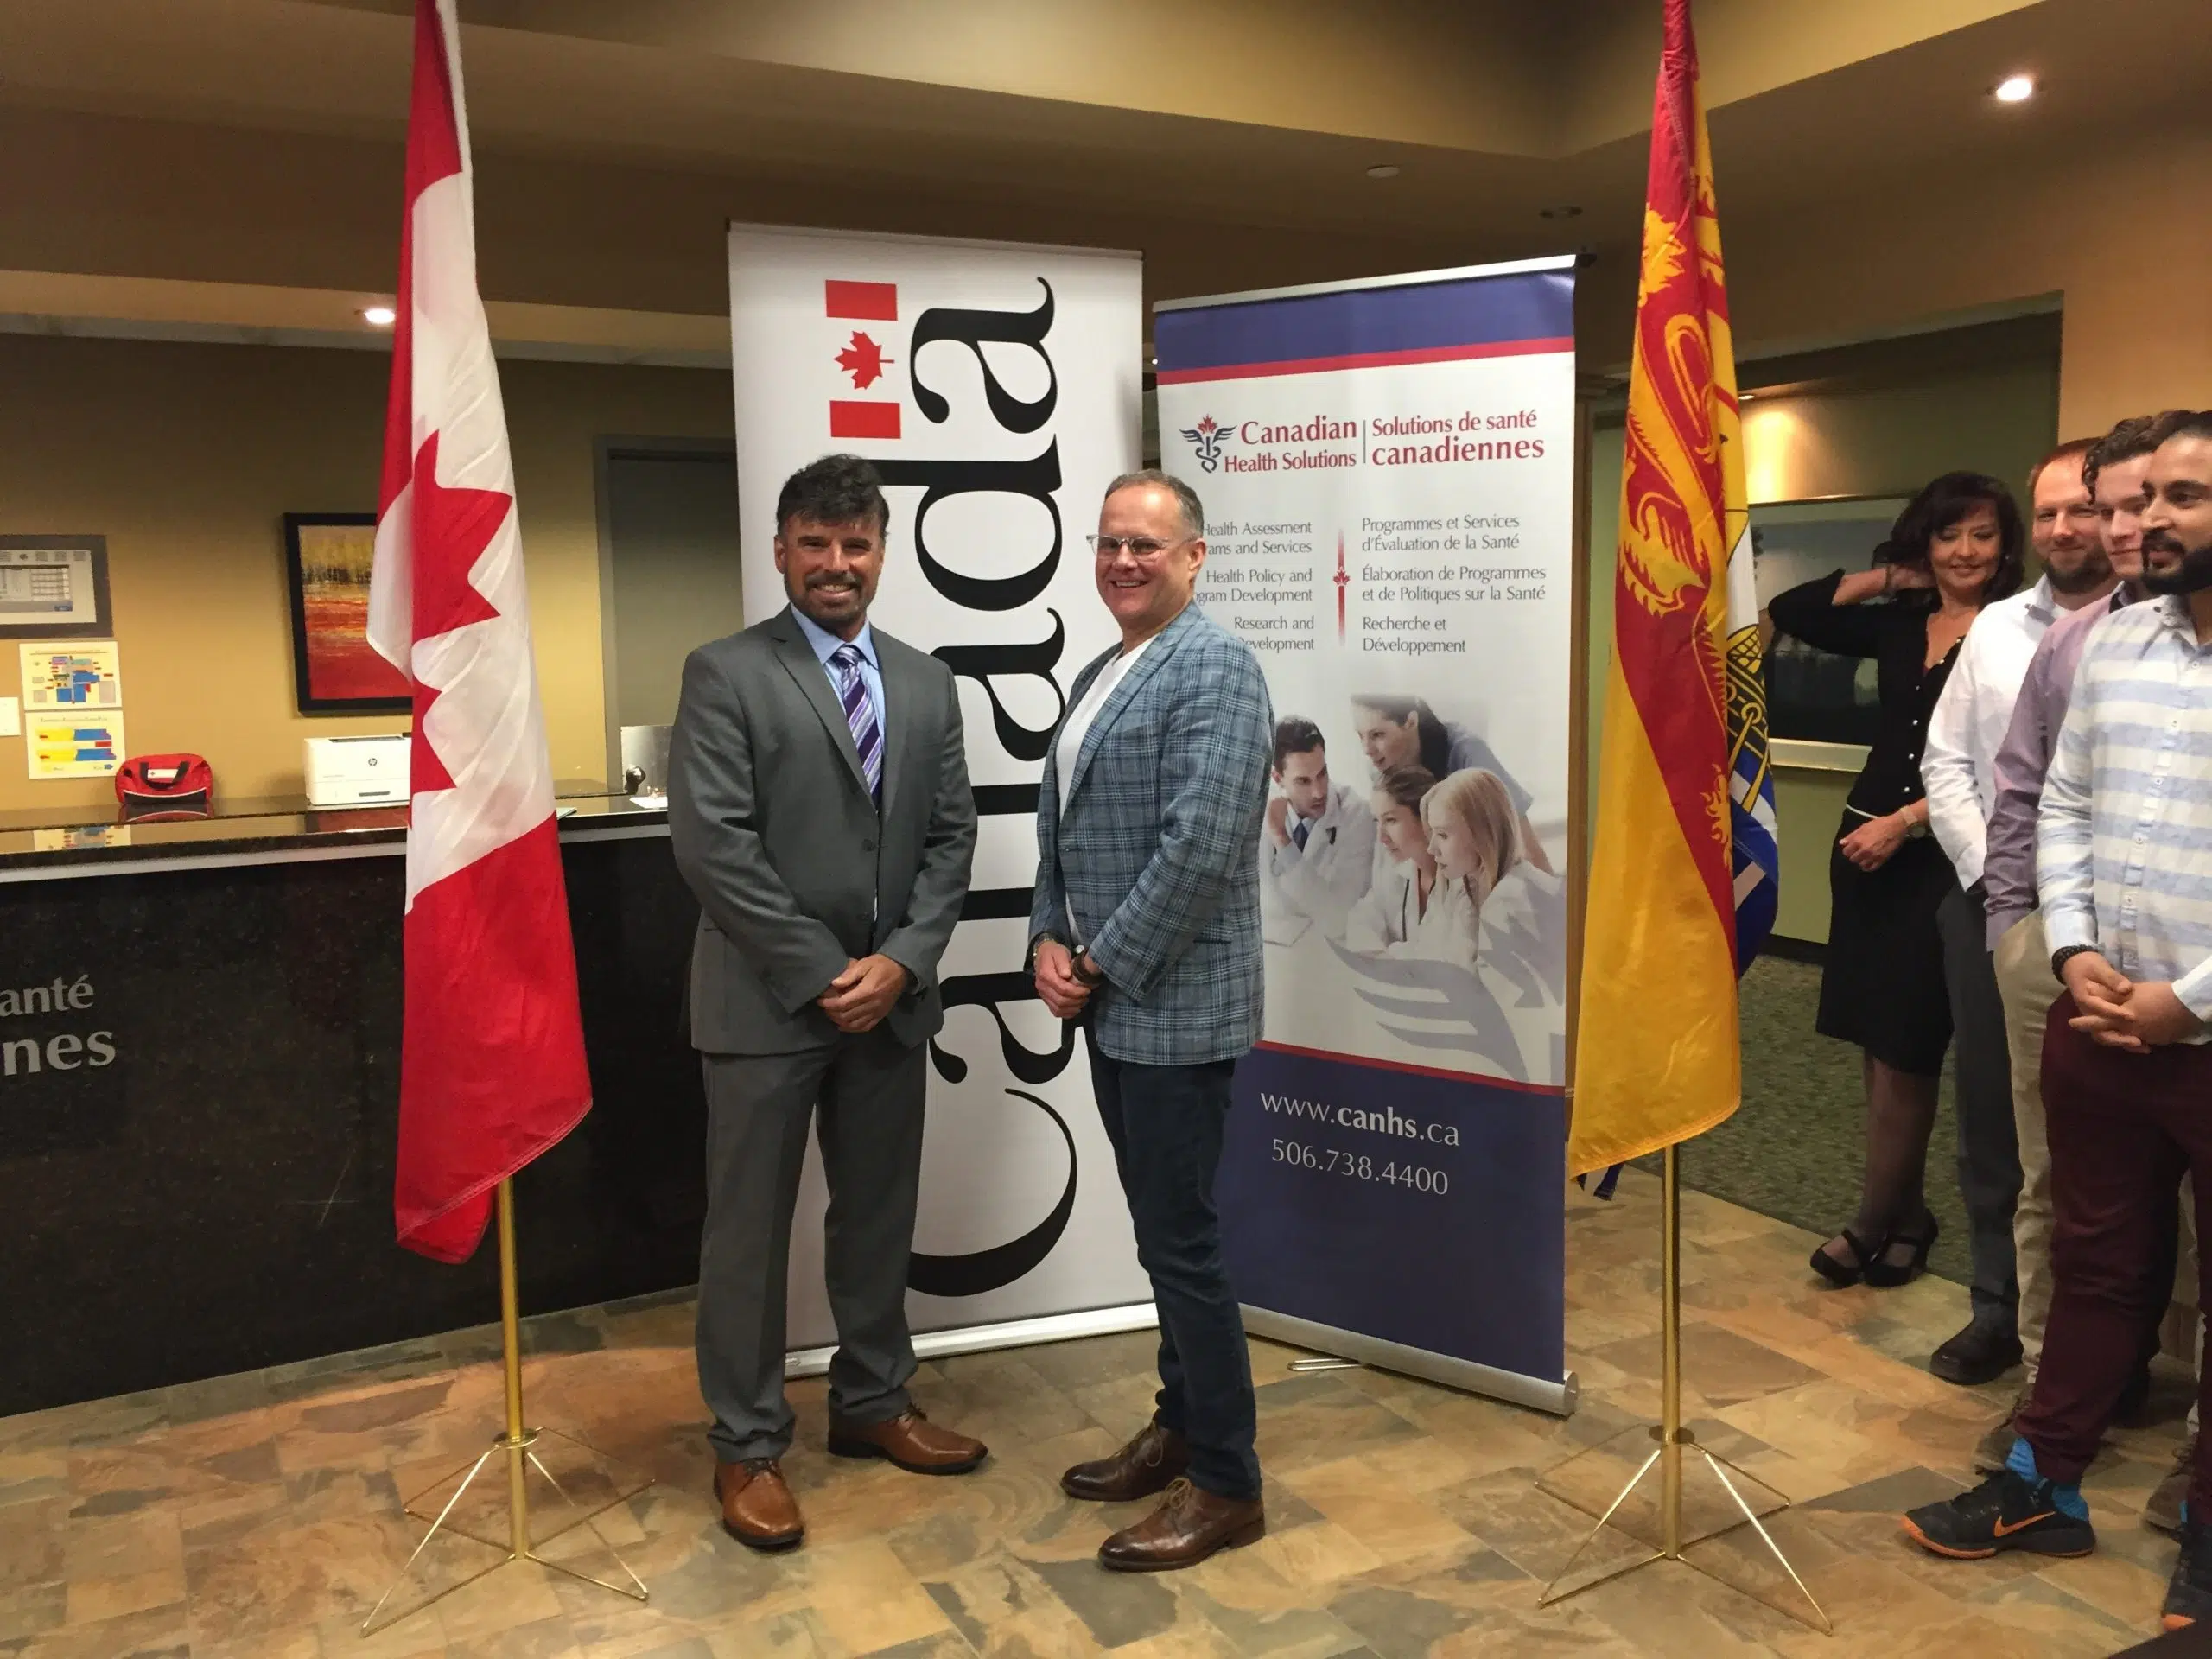 $1m To Expand Saint John's Canadian Health Solutions